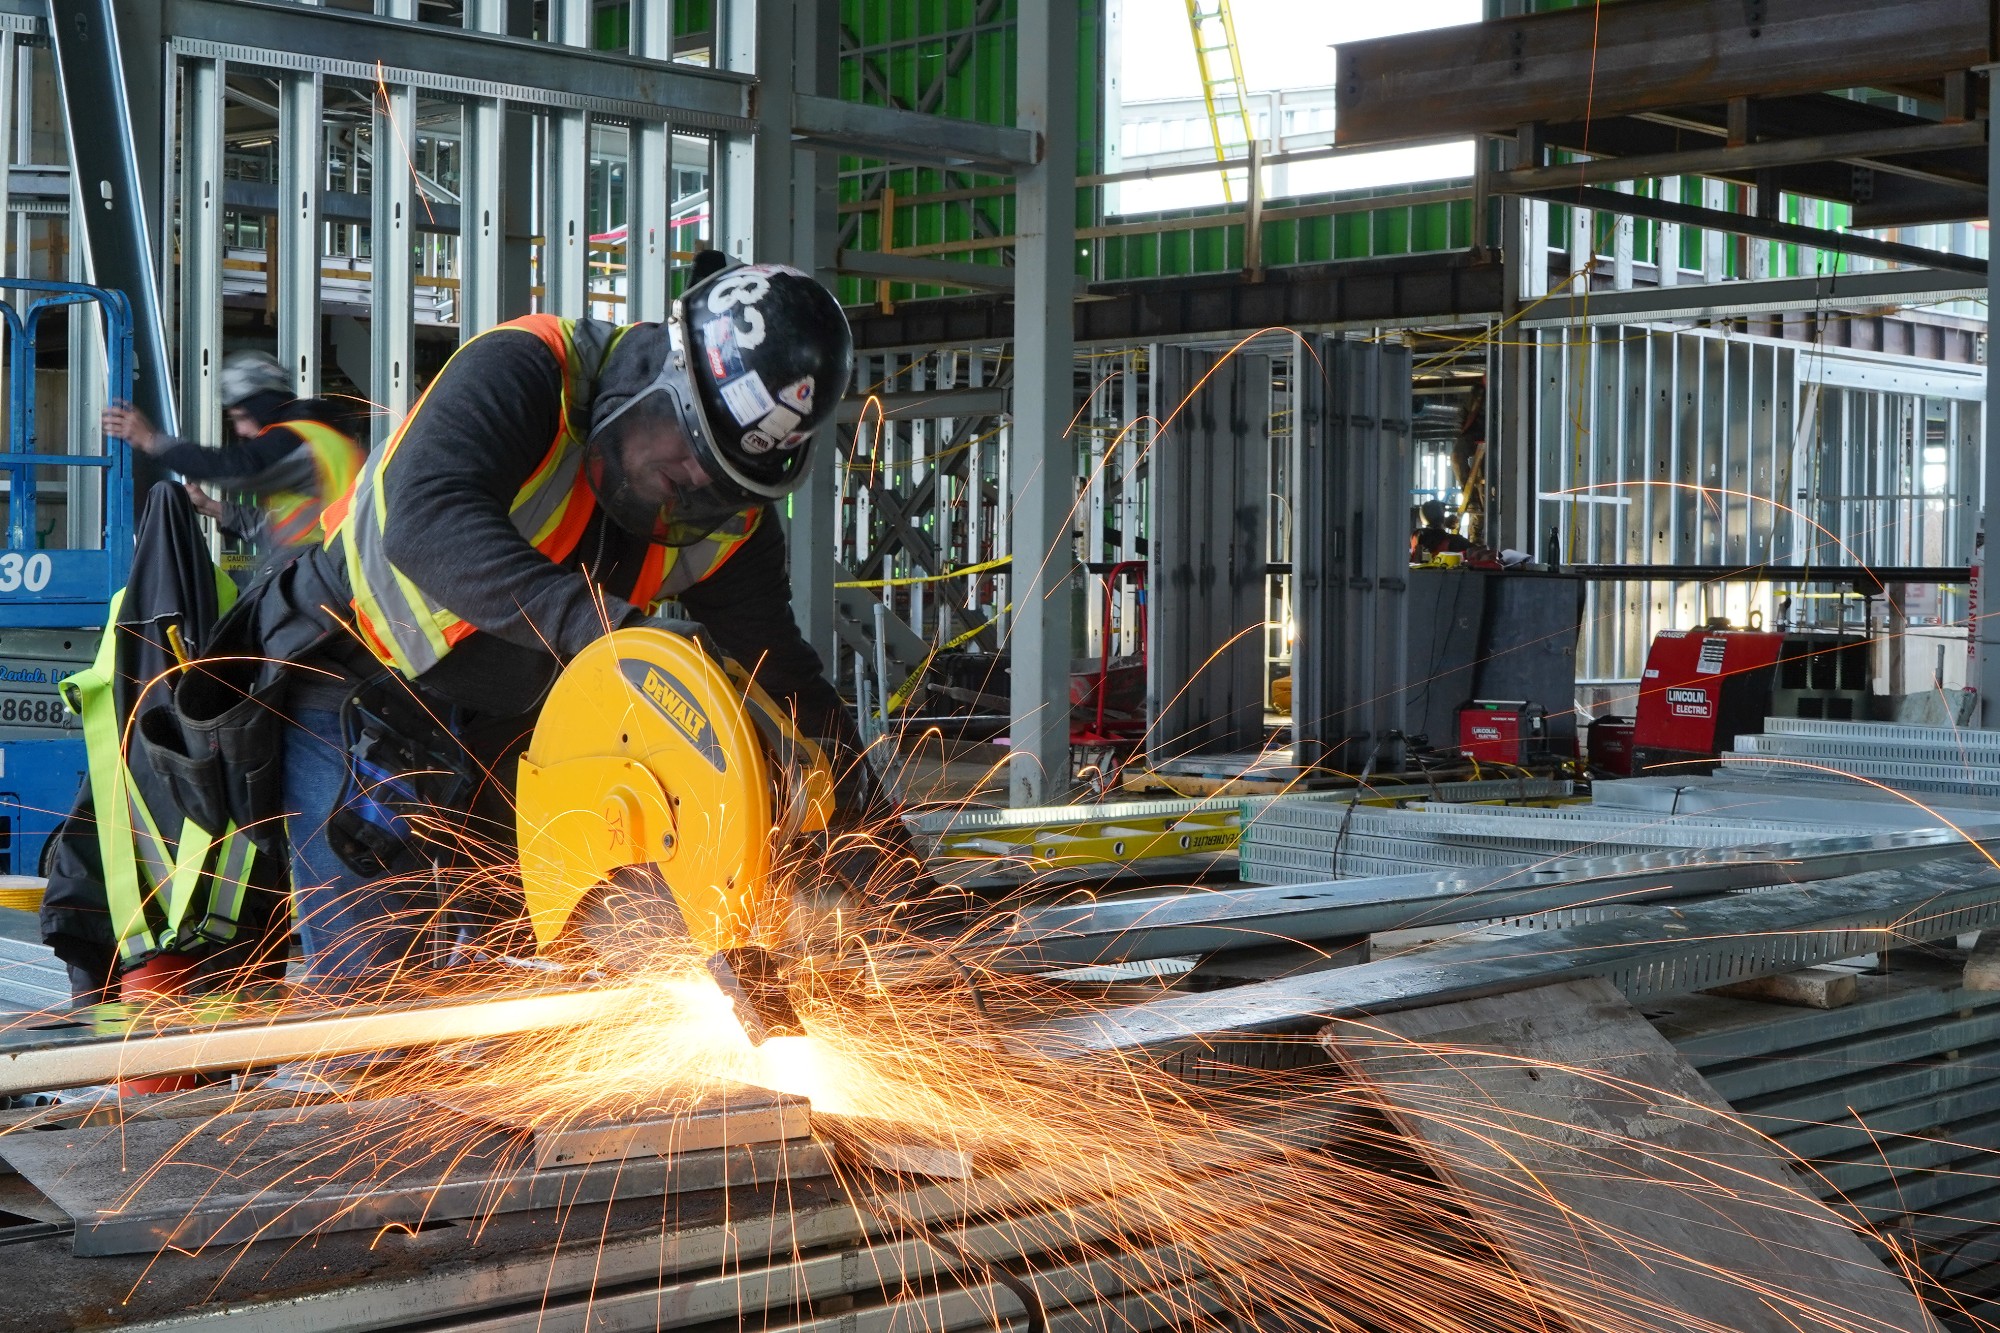 Sparks flying as a Chandos welder works on a large piece of building material on site.